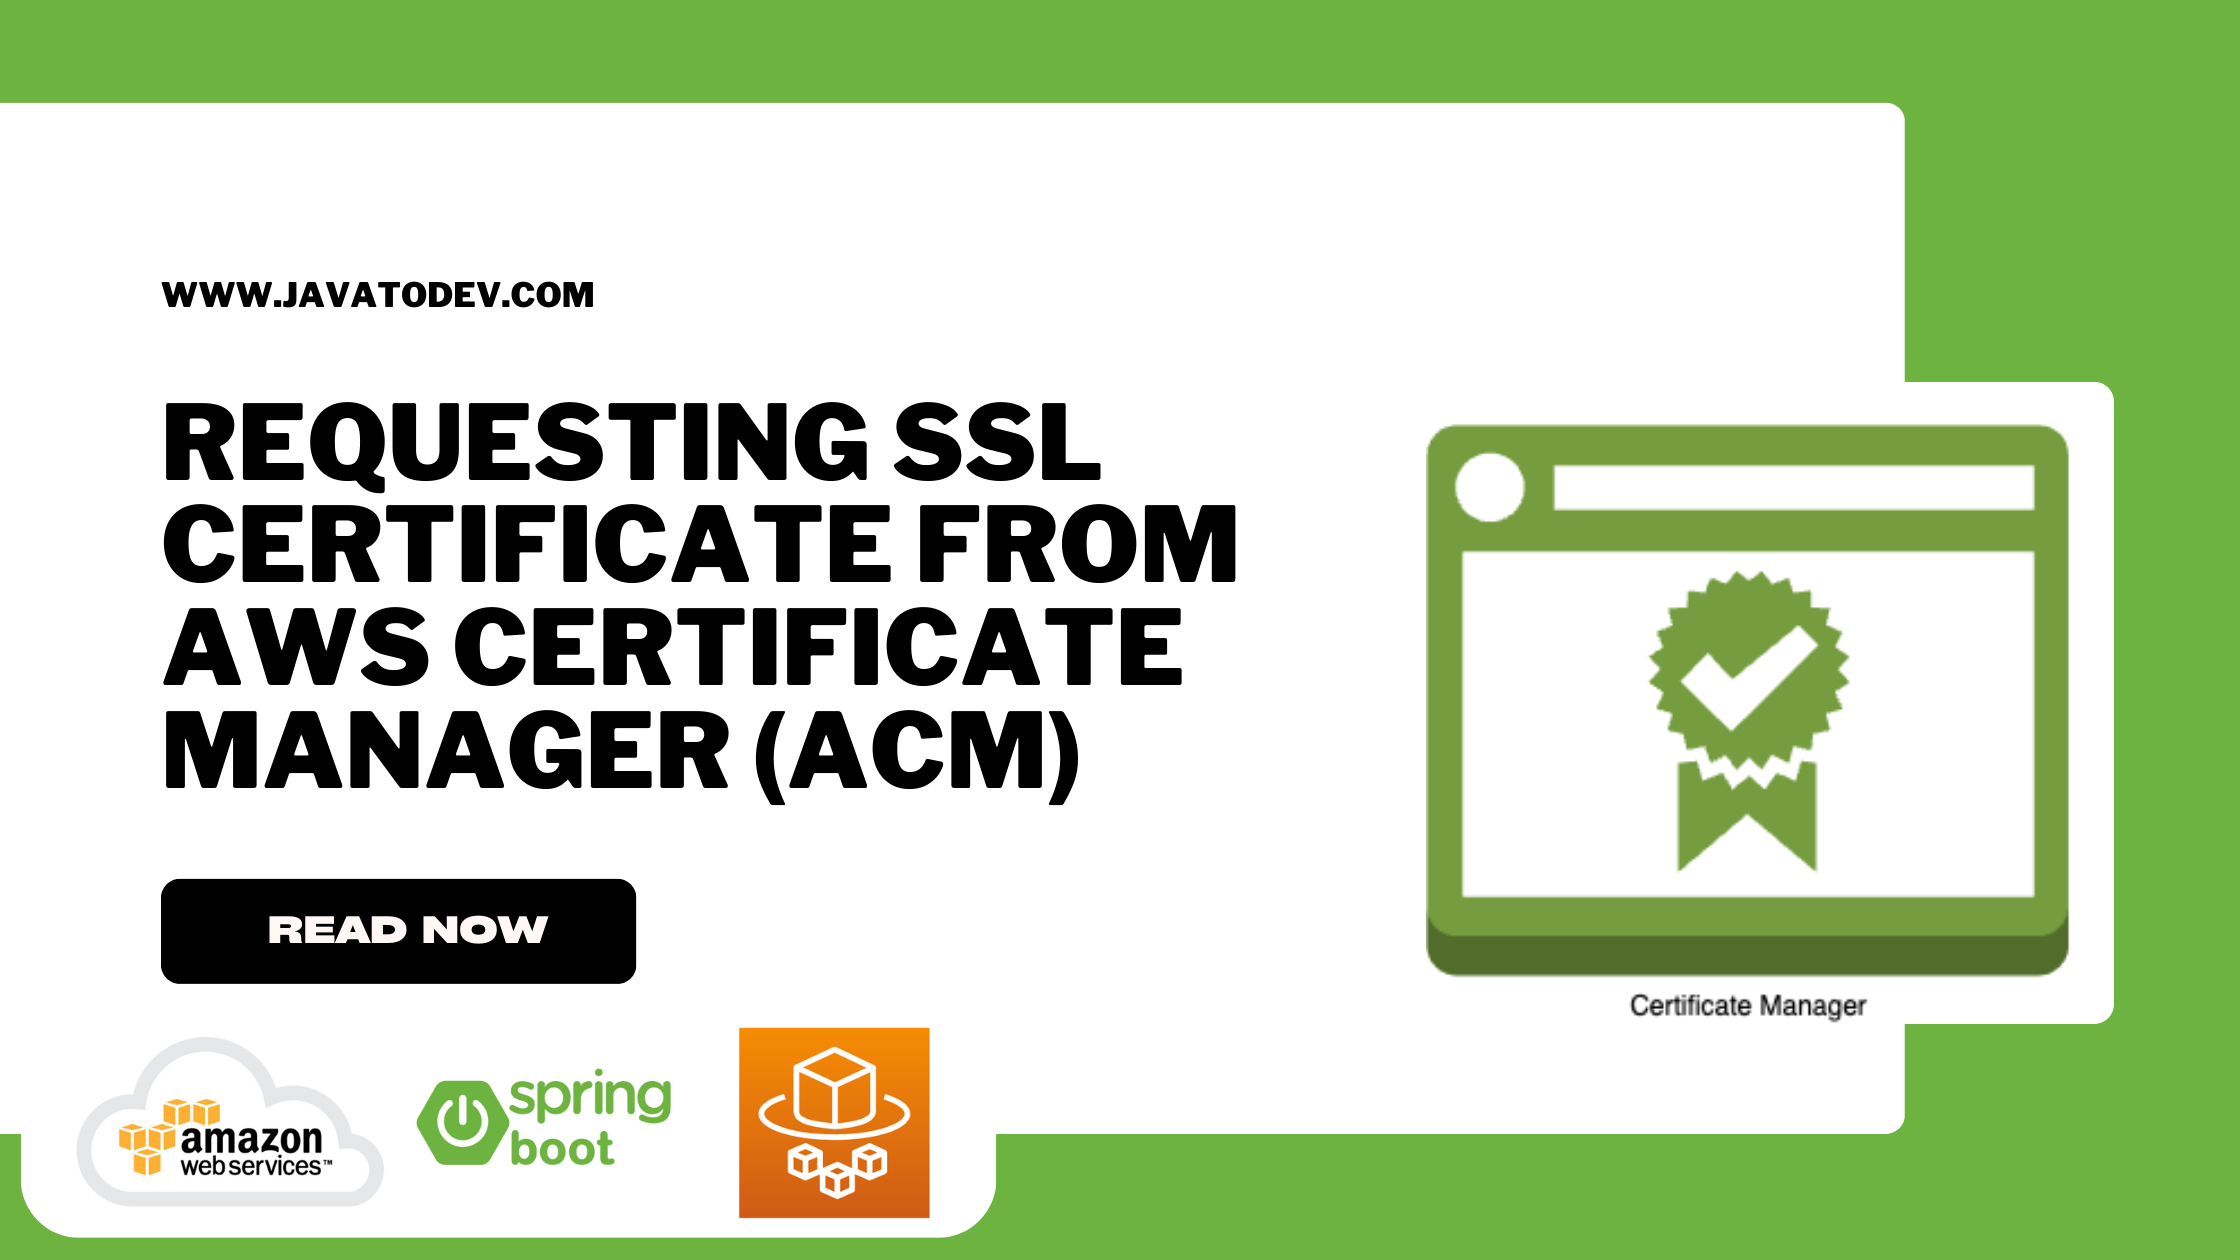 How to Request SSL Certificate From AWS Certificate Manager